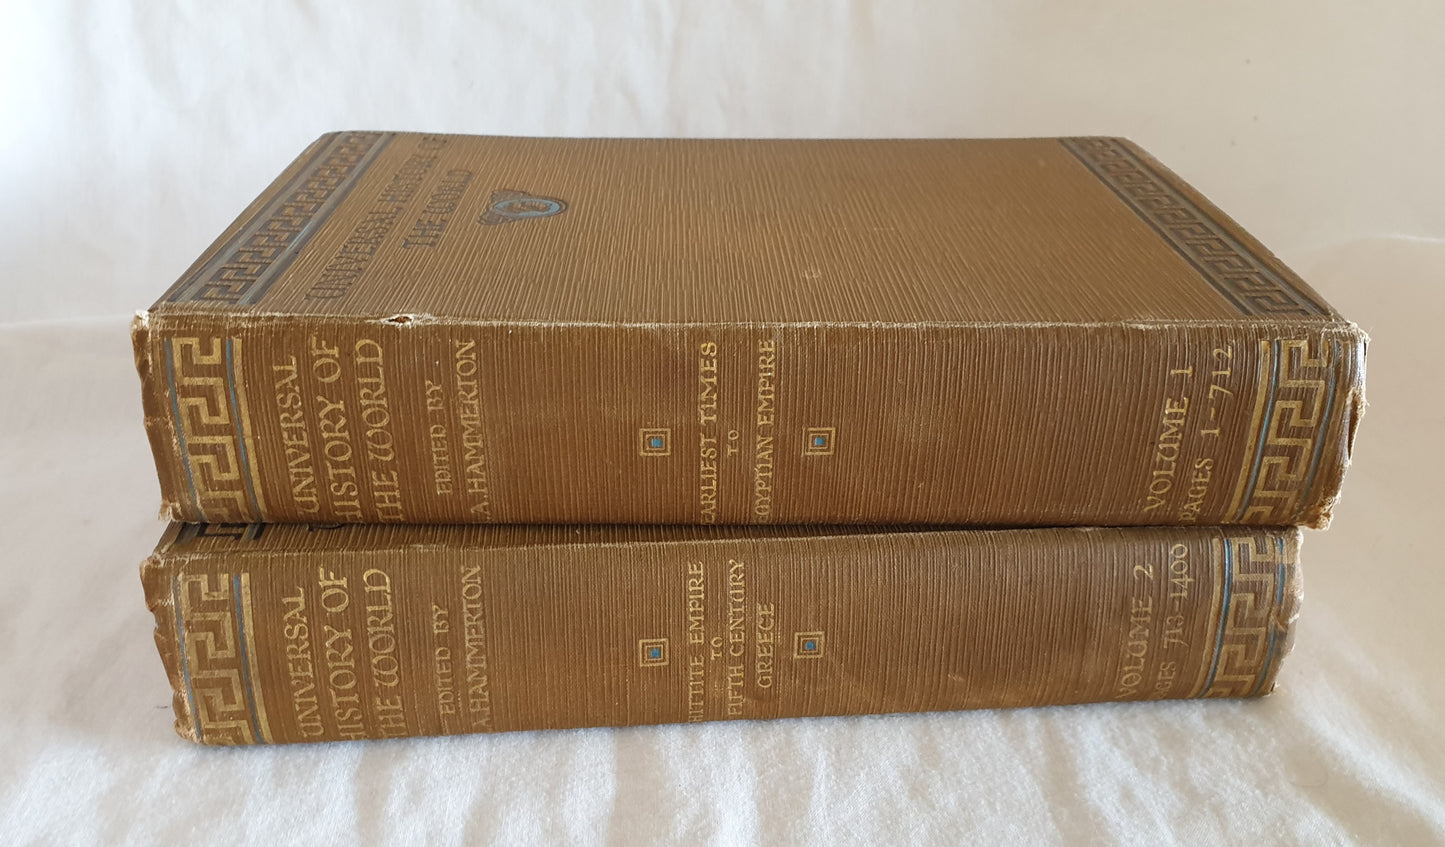 Universal History of the World by J. A. Hammerton (Volumes 1 and 2)